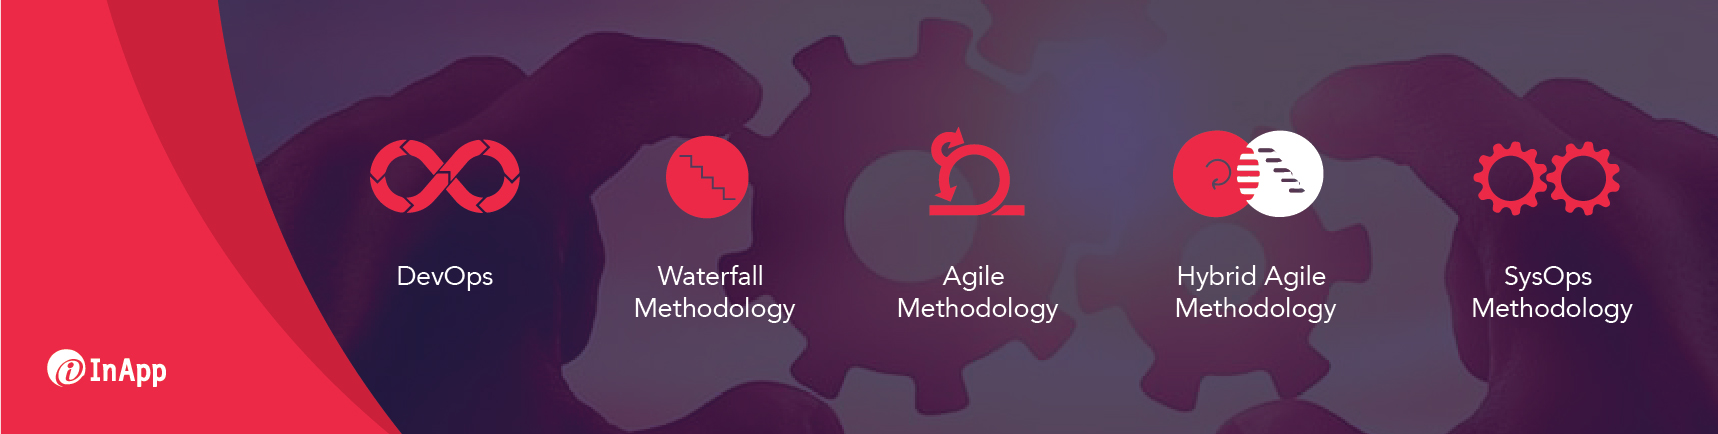 What Are Common Software Product Development Methodologies?